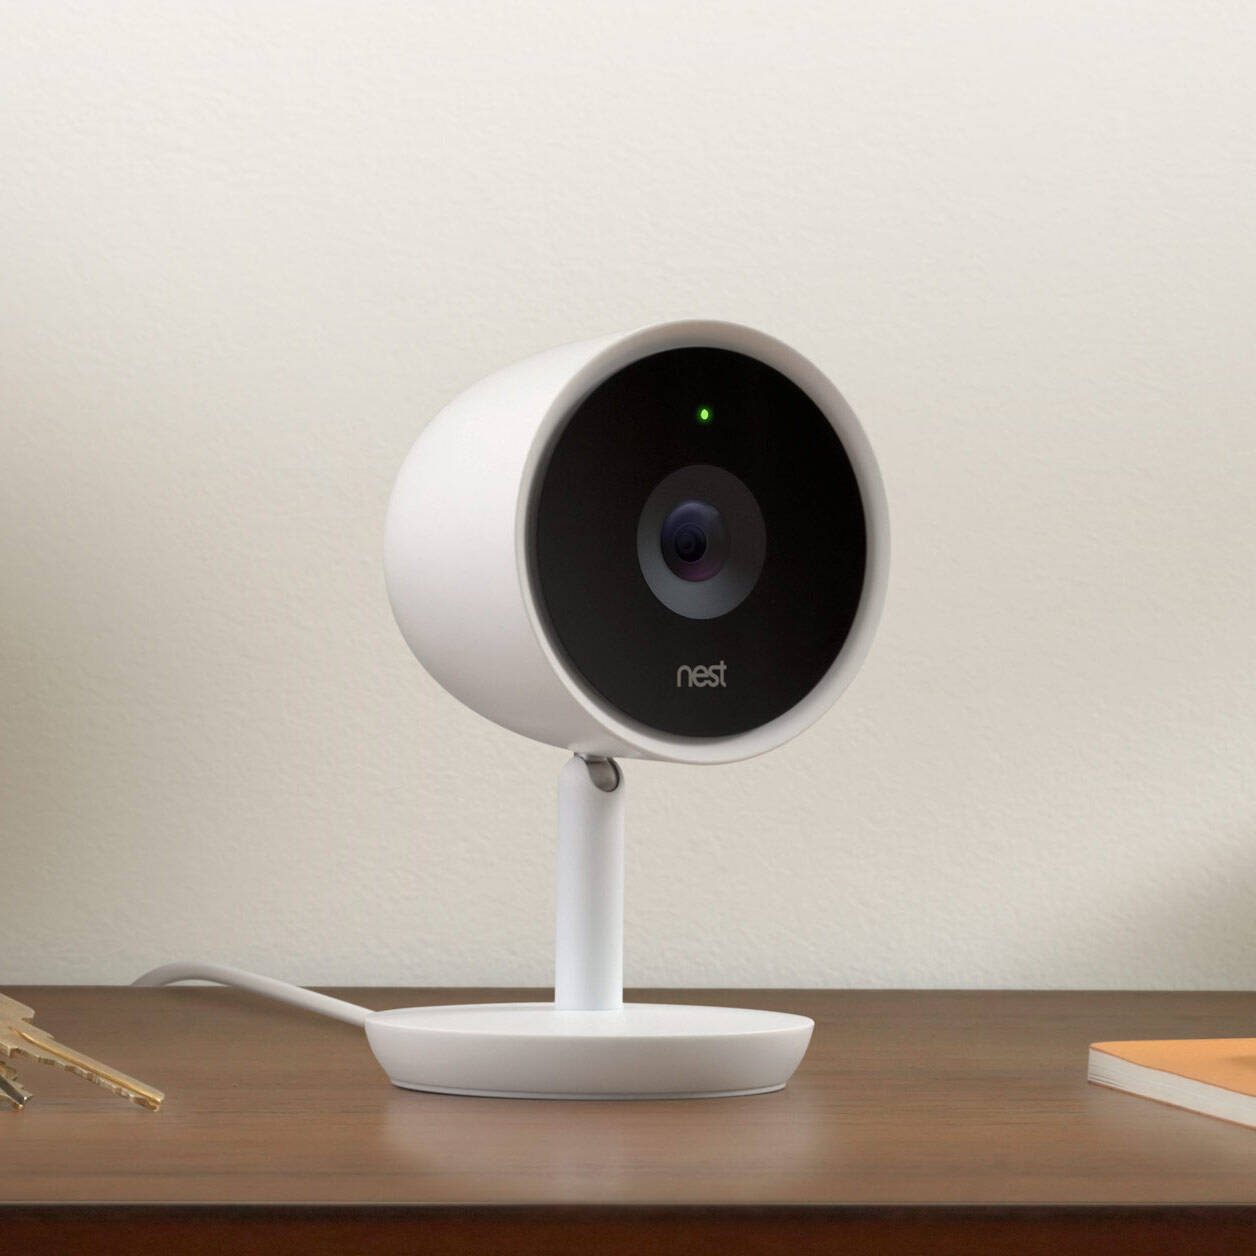 Nest Cam IQ: Smart Security Camera - //coolthings.us